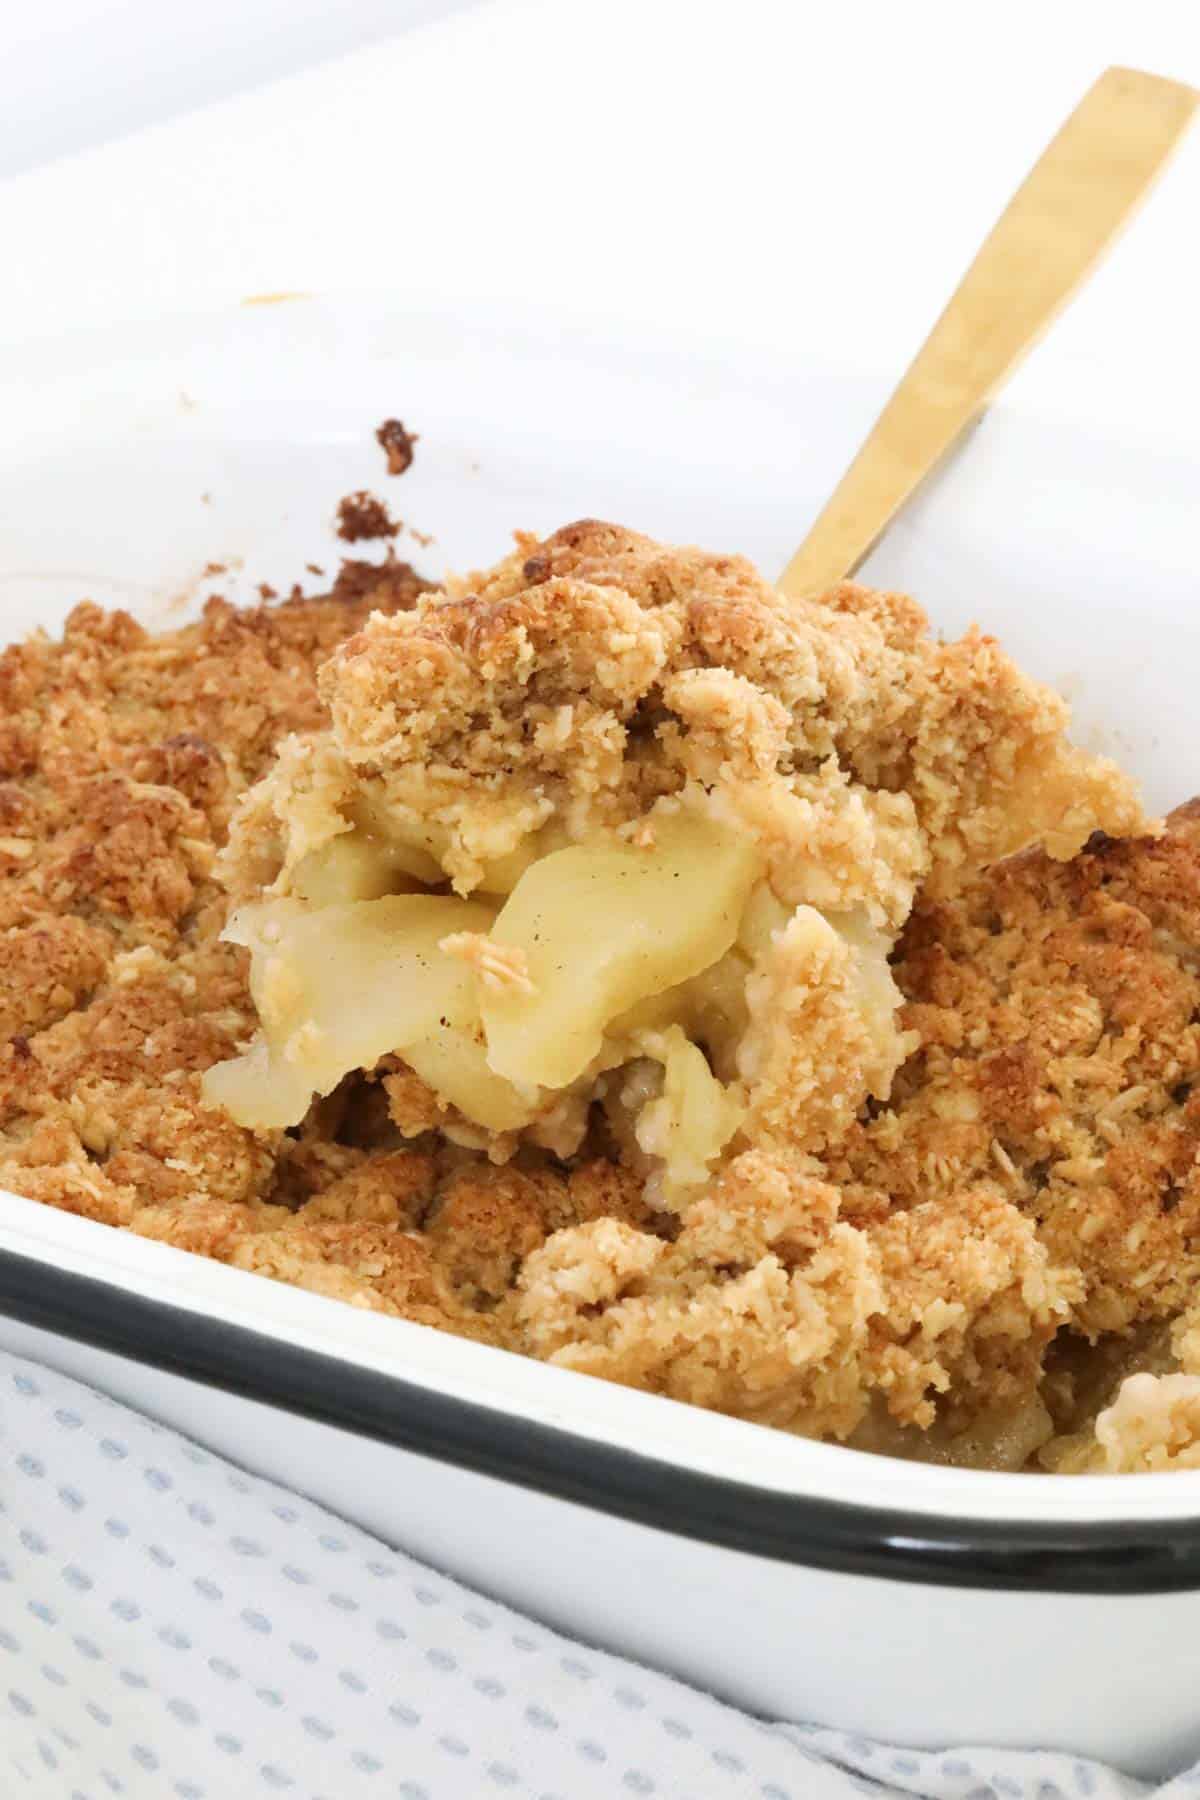 A gold serving spoon lifting out a serving of Apple Crumble from the enamel baking dish